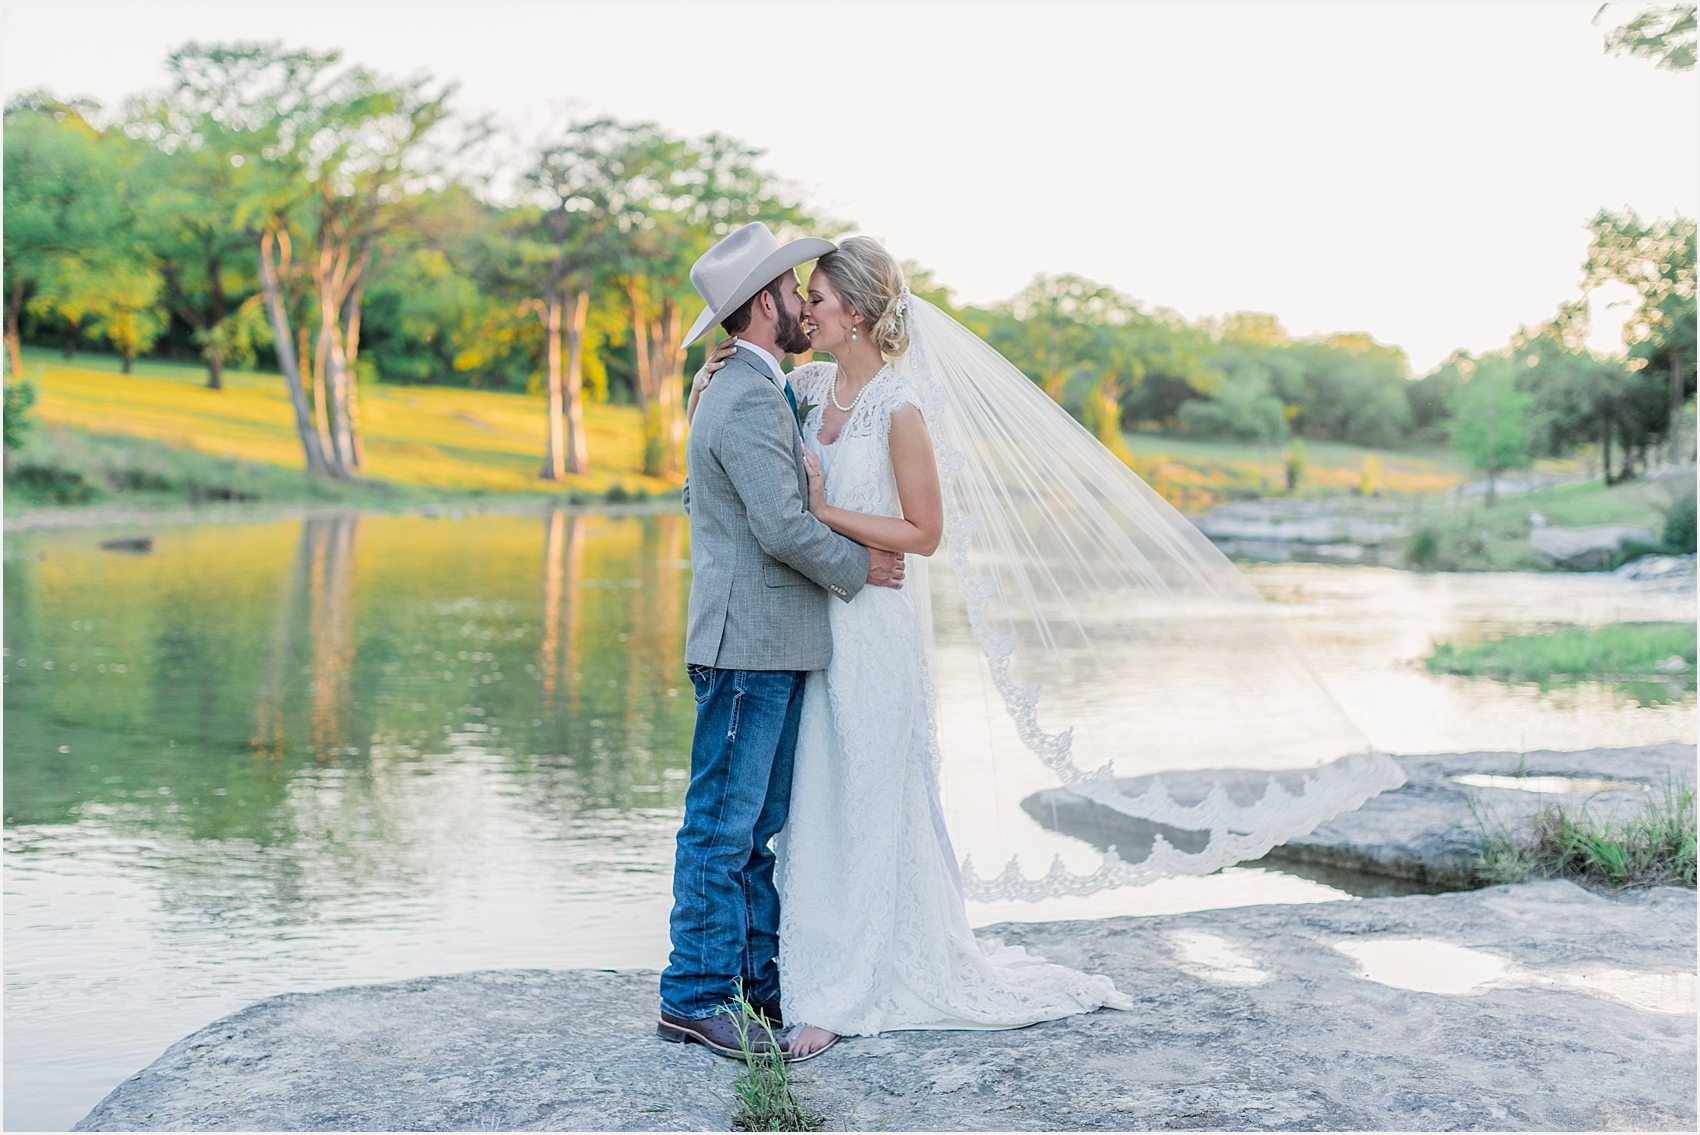 Click through to see how to plan your reception "activities" and why sunset portraits are imperetive. It’s time away from everyone, to soak in this moment with your new spouse.